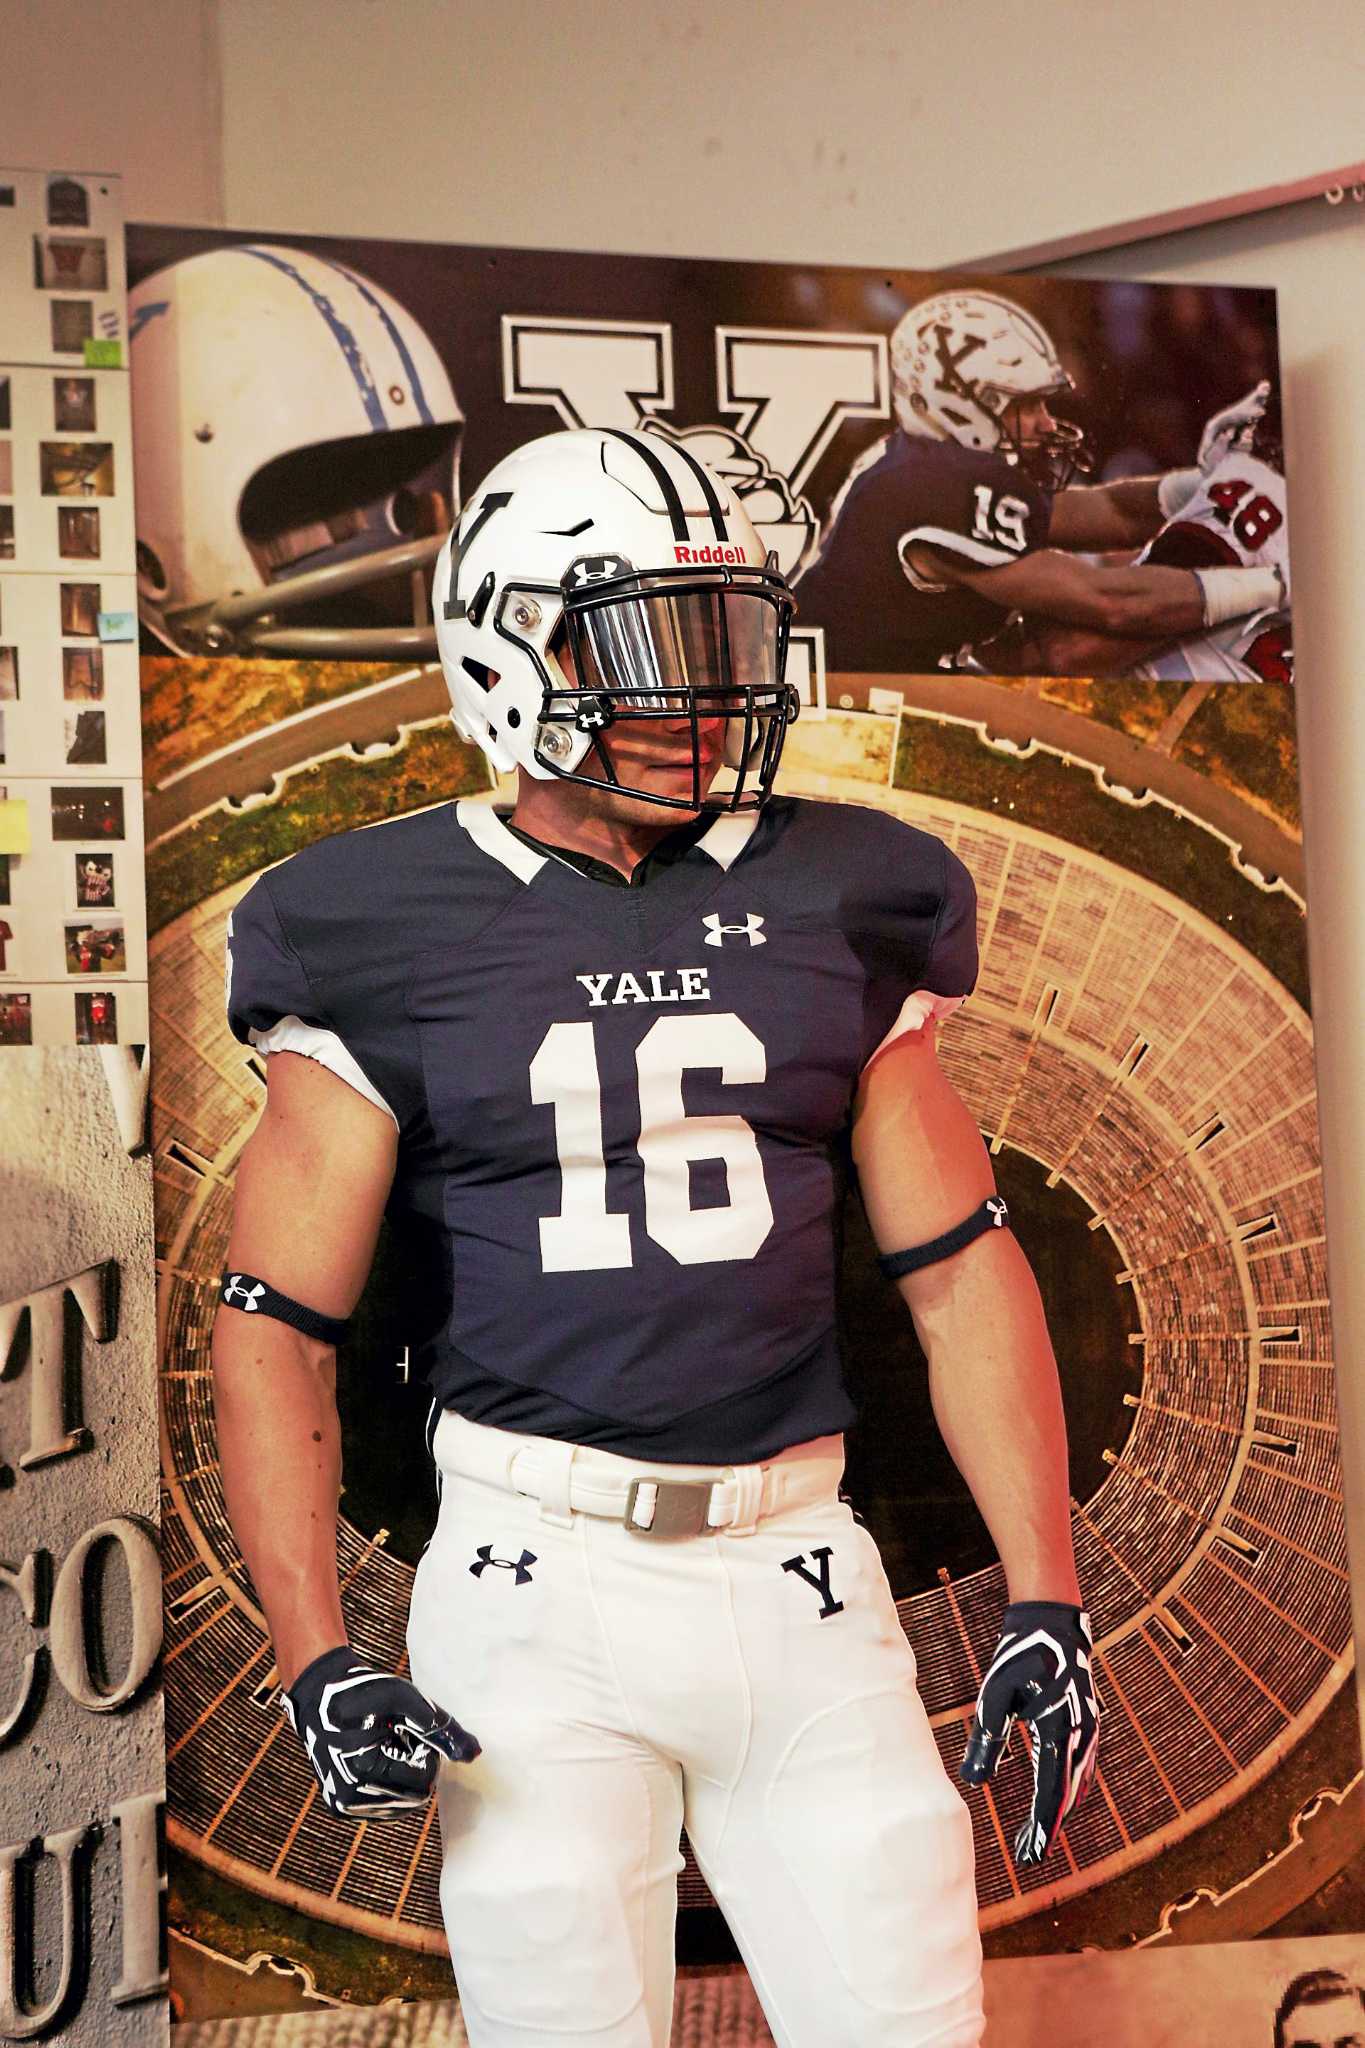 New Yale football uniforms unveiled at Under Amour event